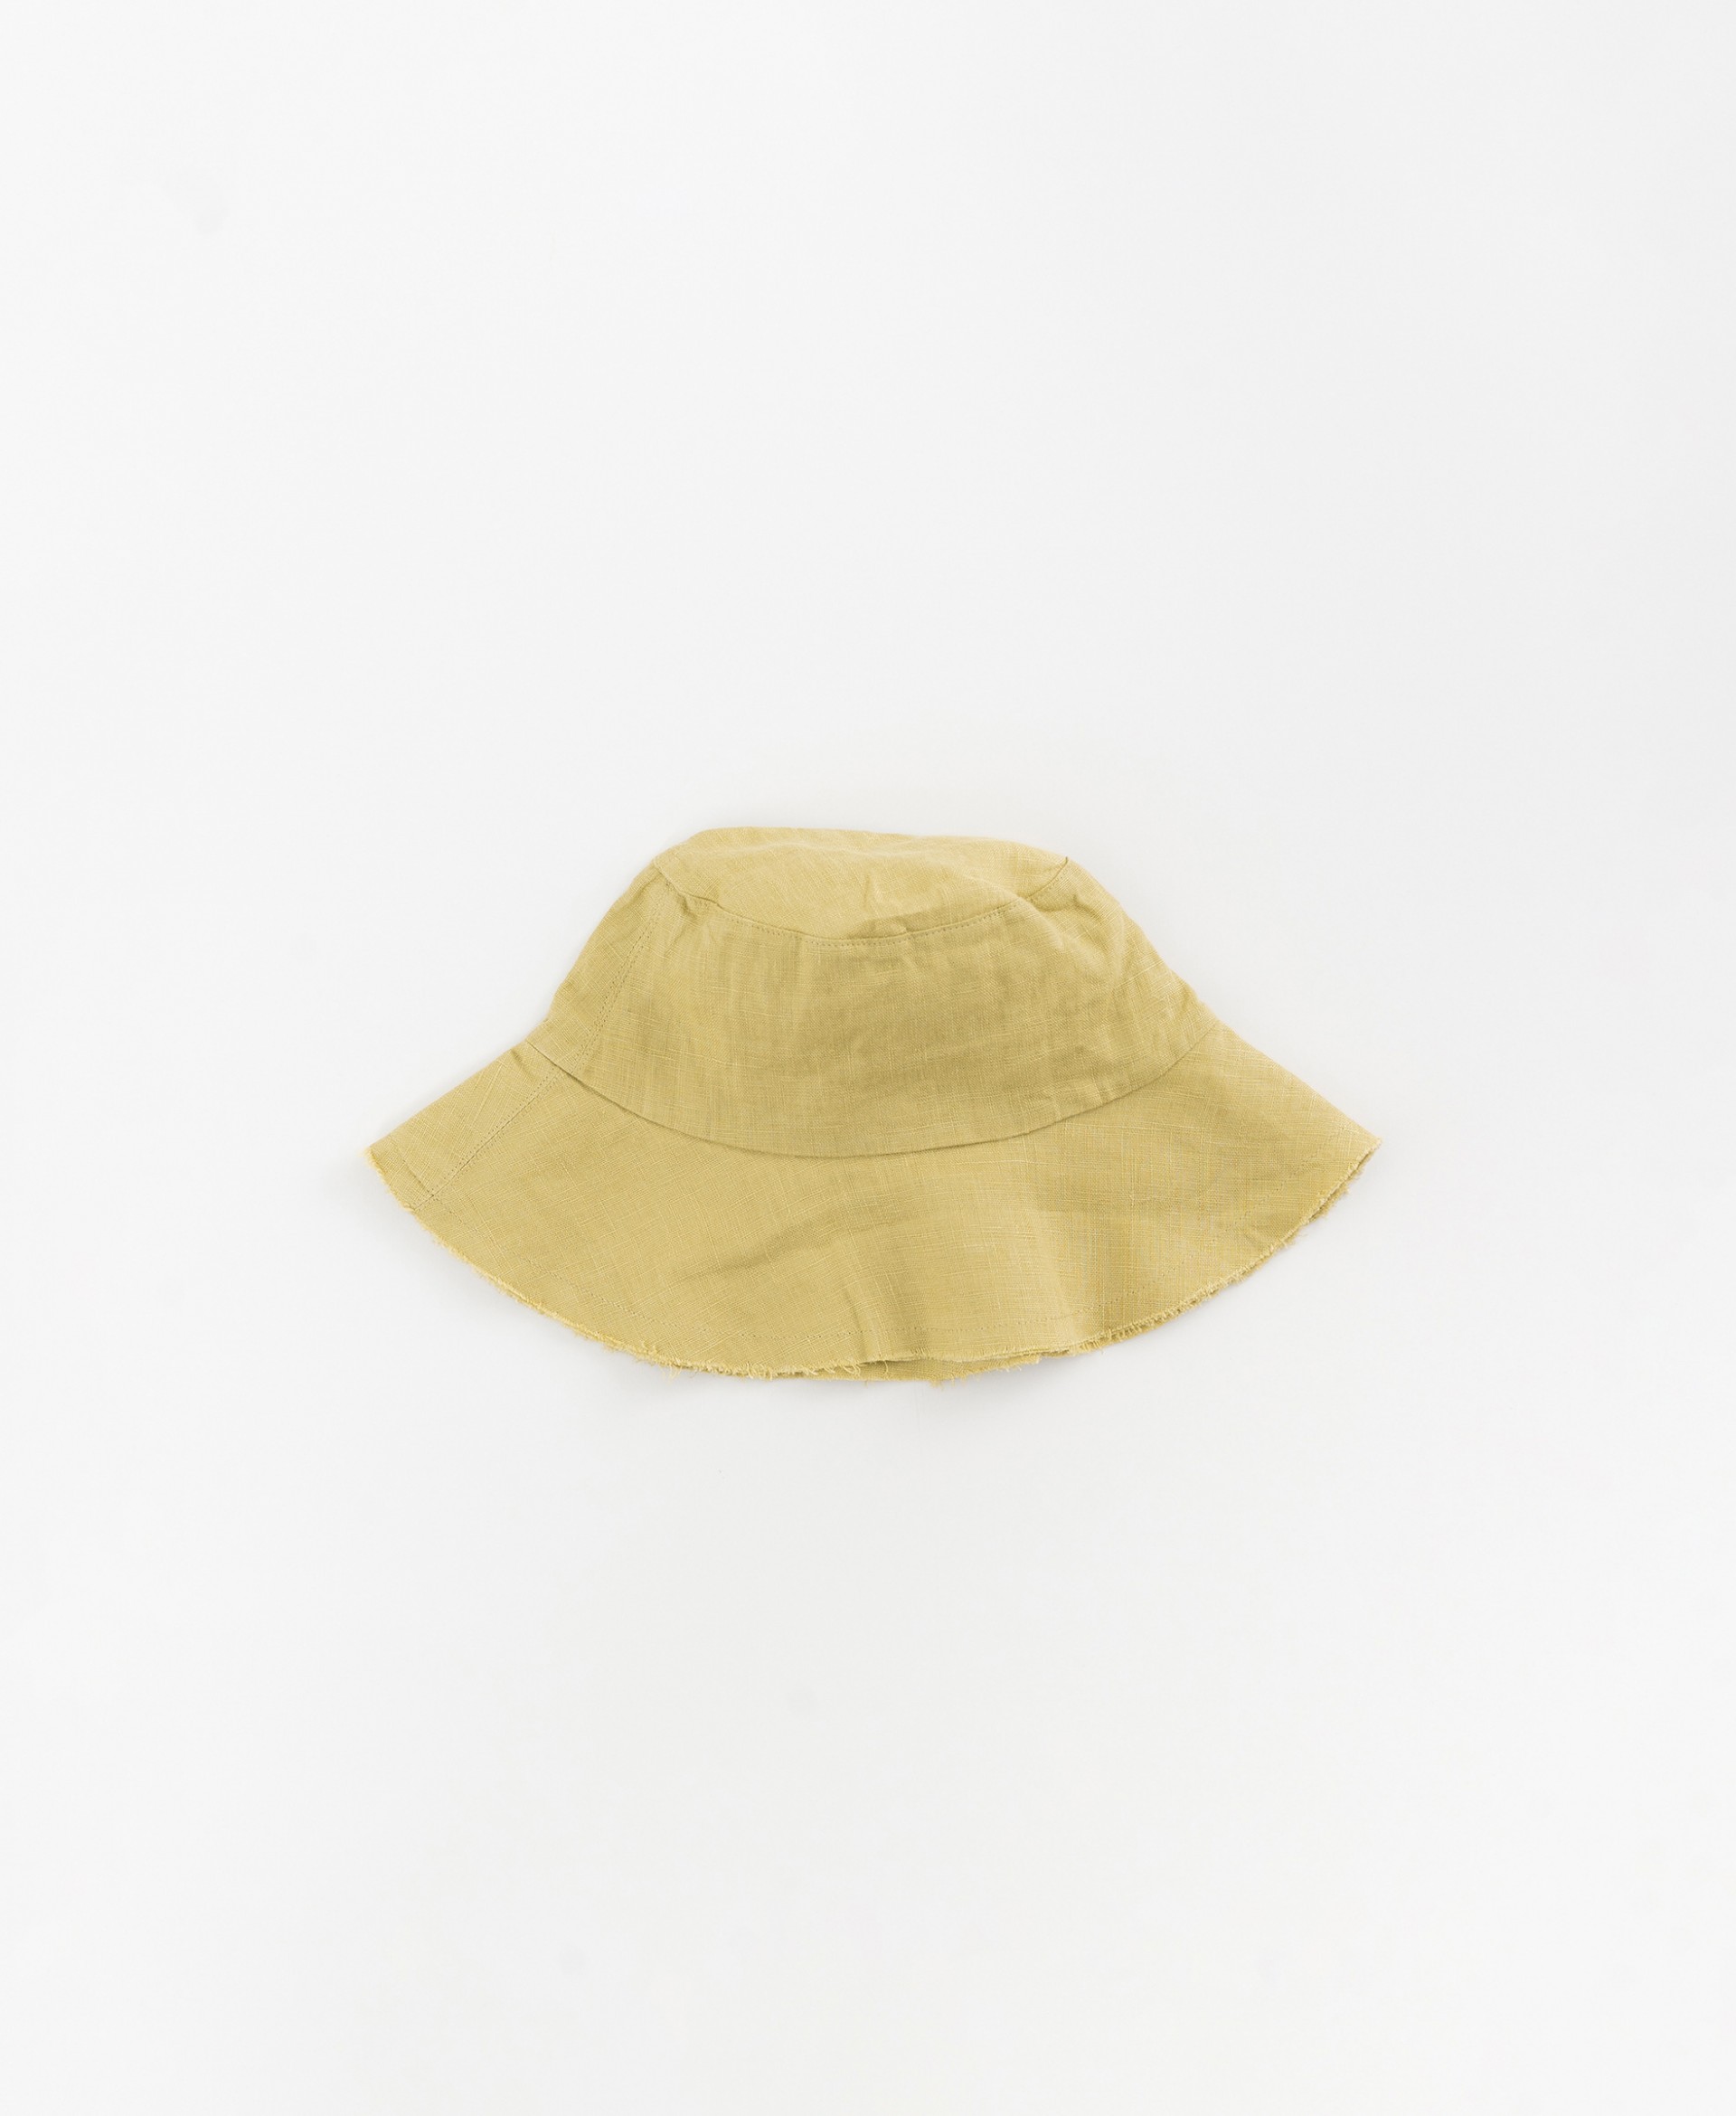 Linen hat with lining | Organic Care